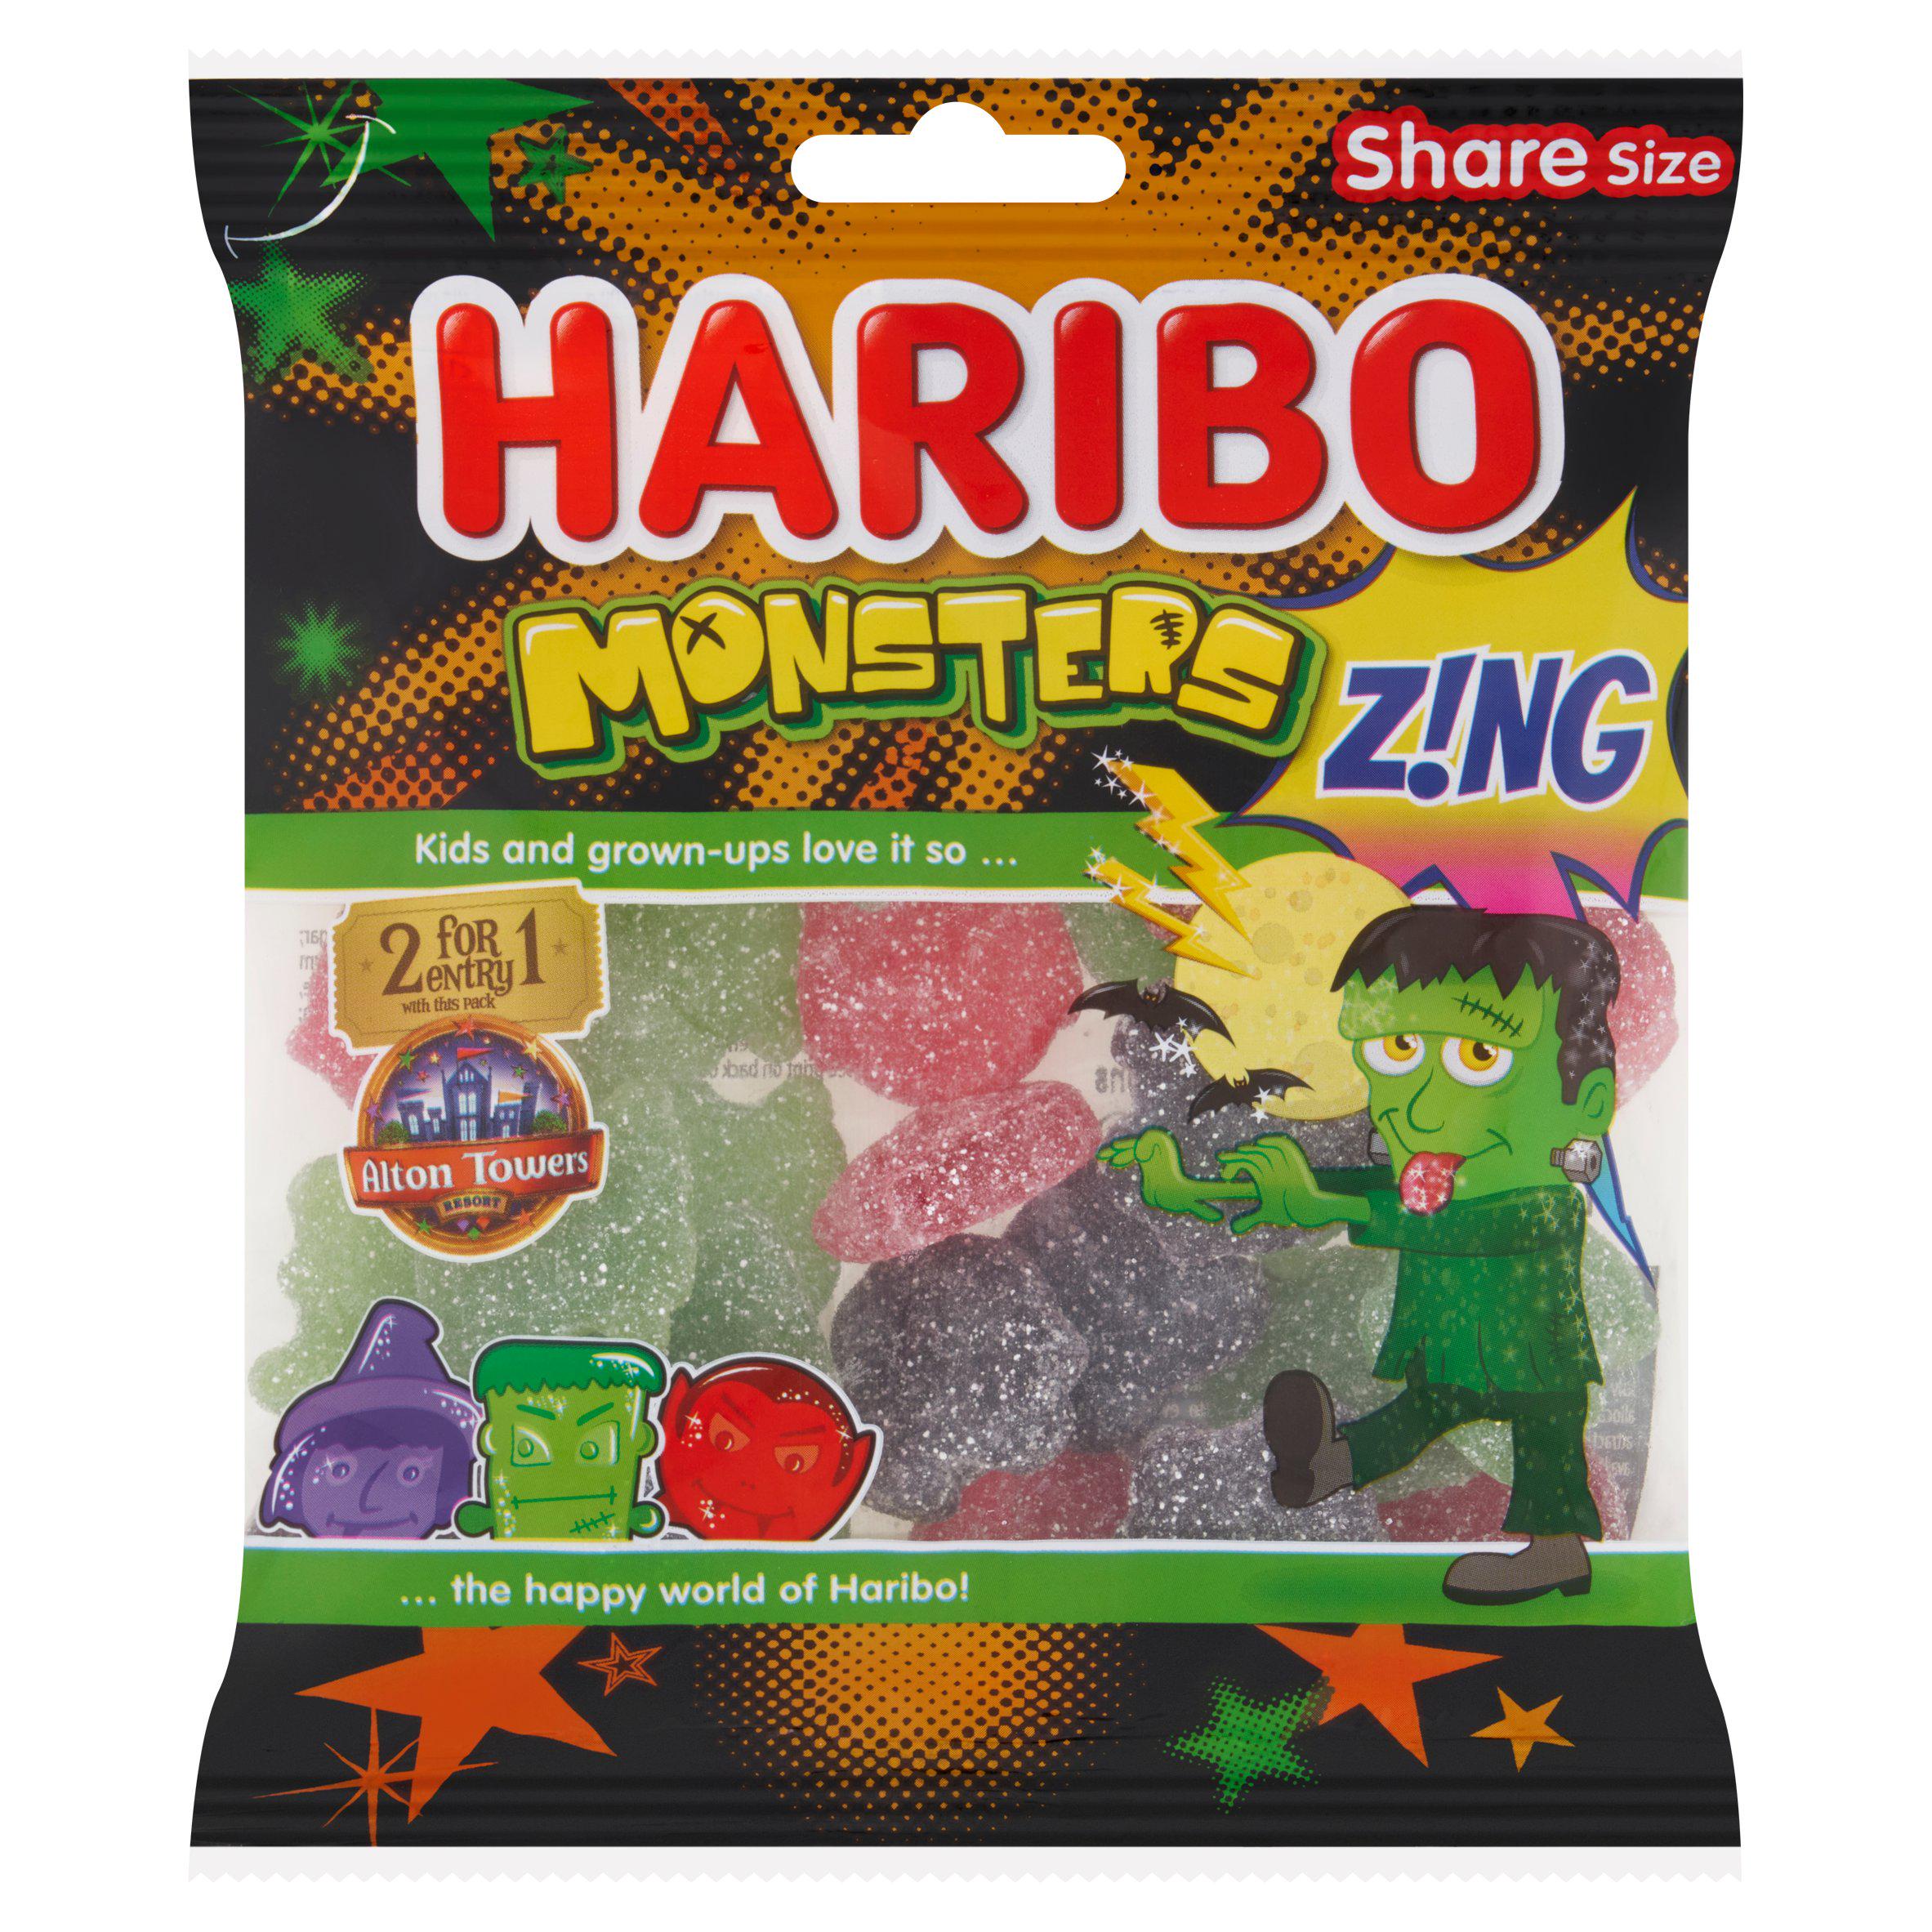 Haribo Monsters Zing -  Limited Edition